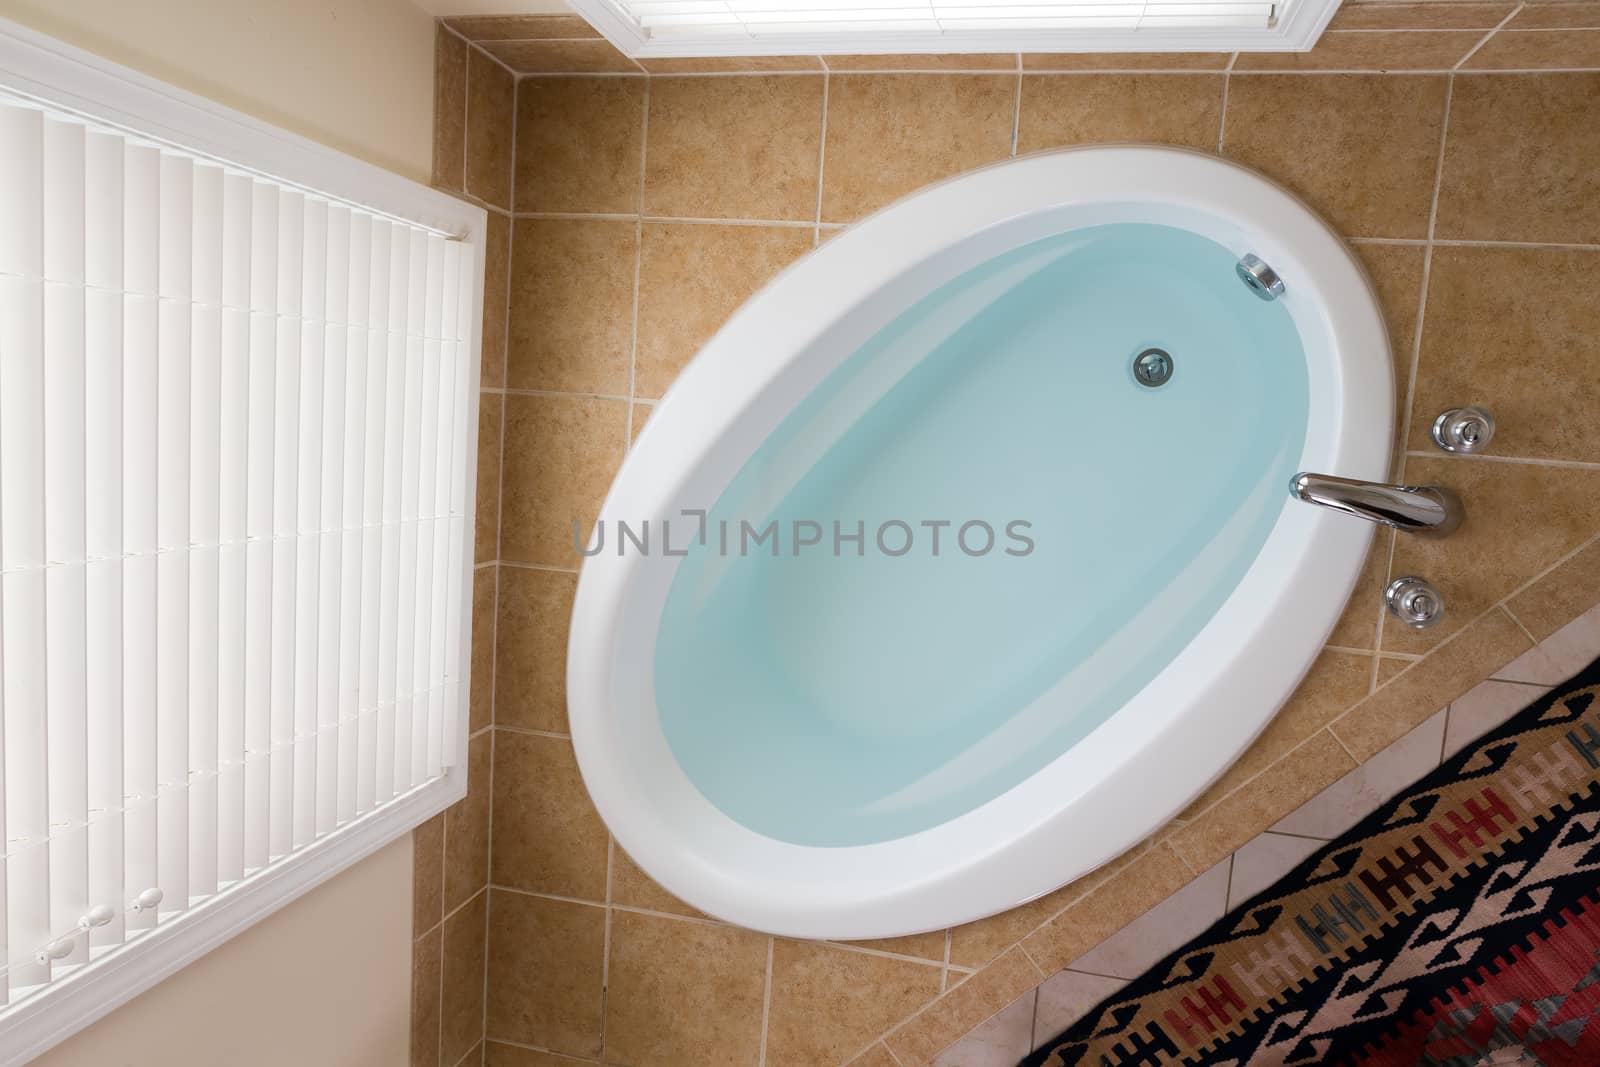 Modern oval domestic bathtub full of clean water in a brown tile surround below a tall window with blinds viewed from above